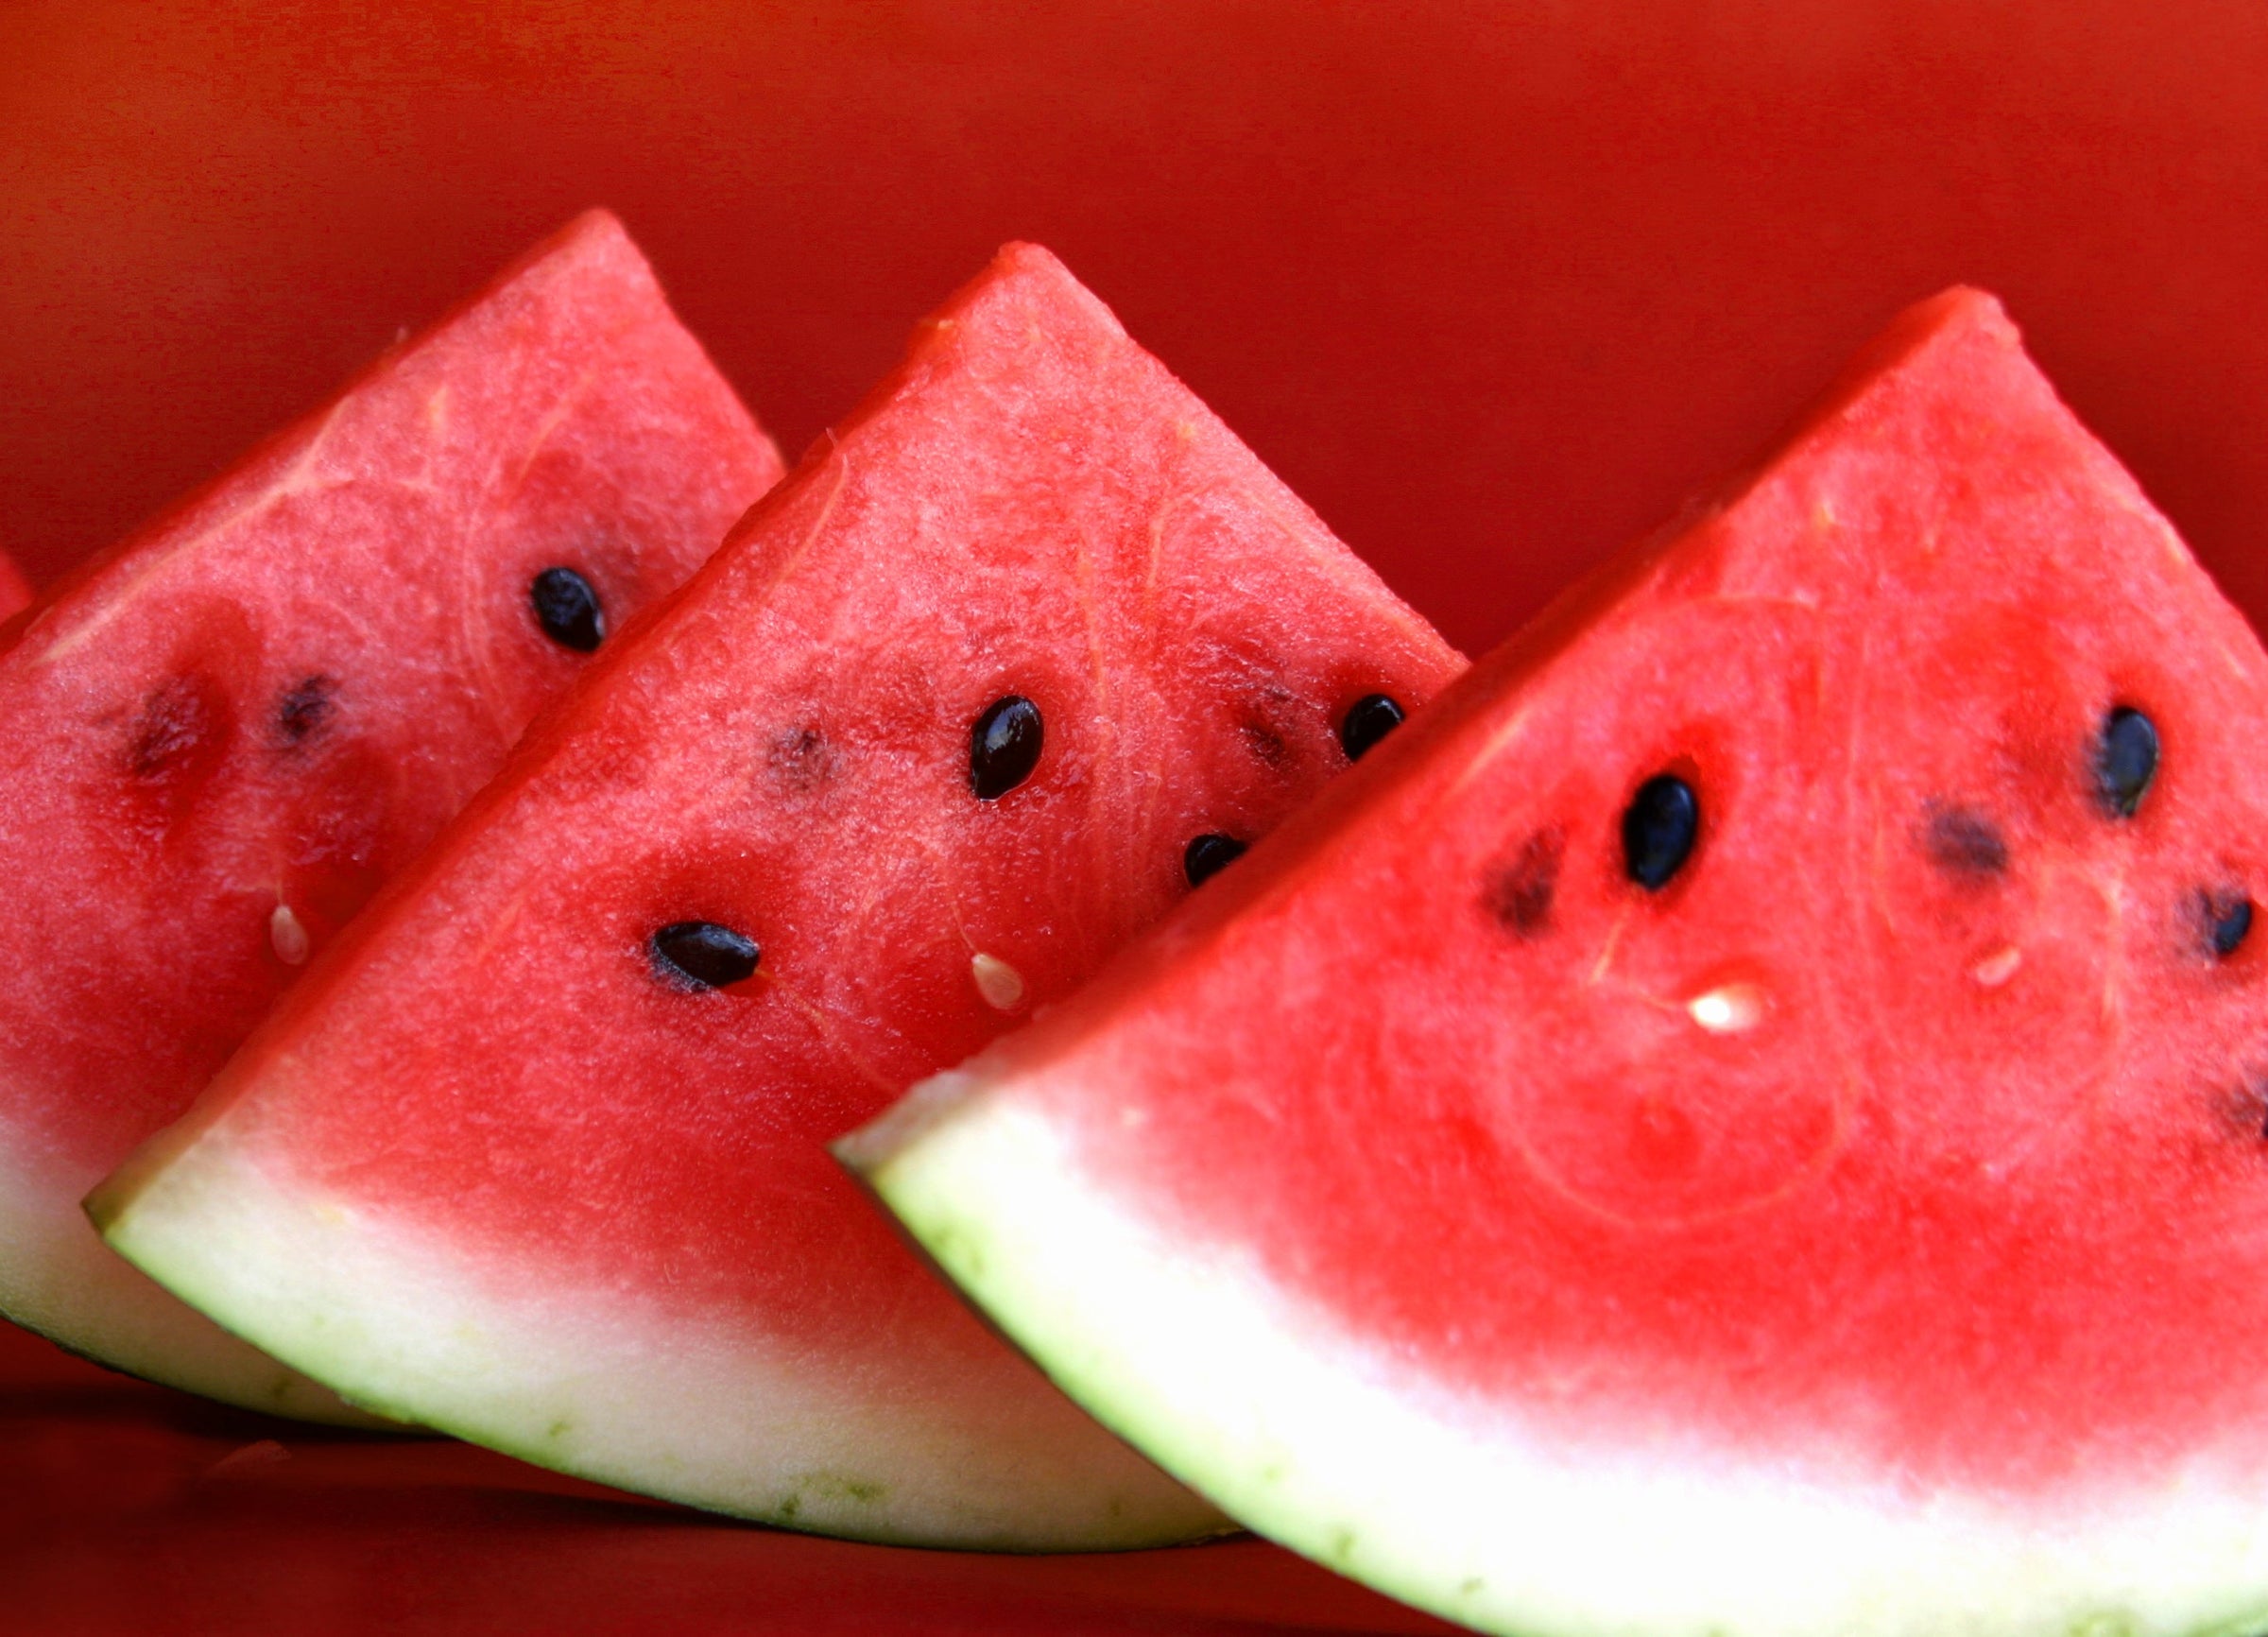 sweet red watermelon to grow in your garden